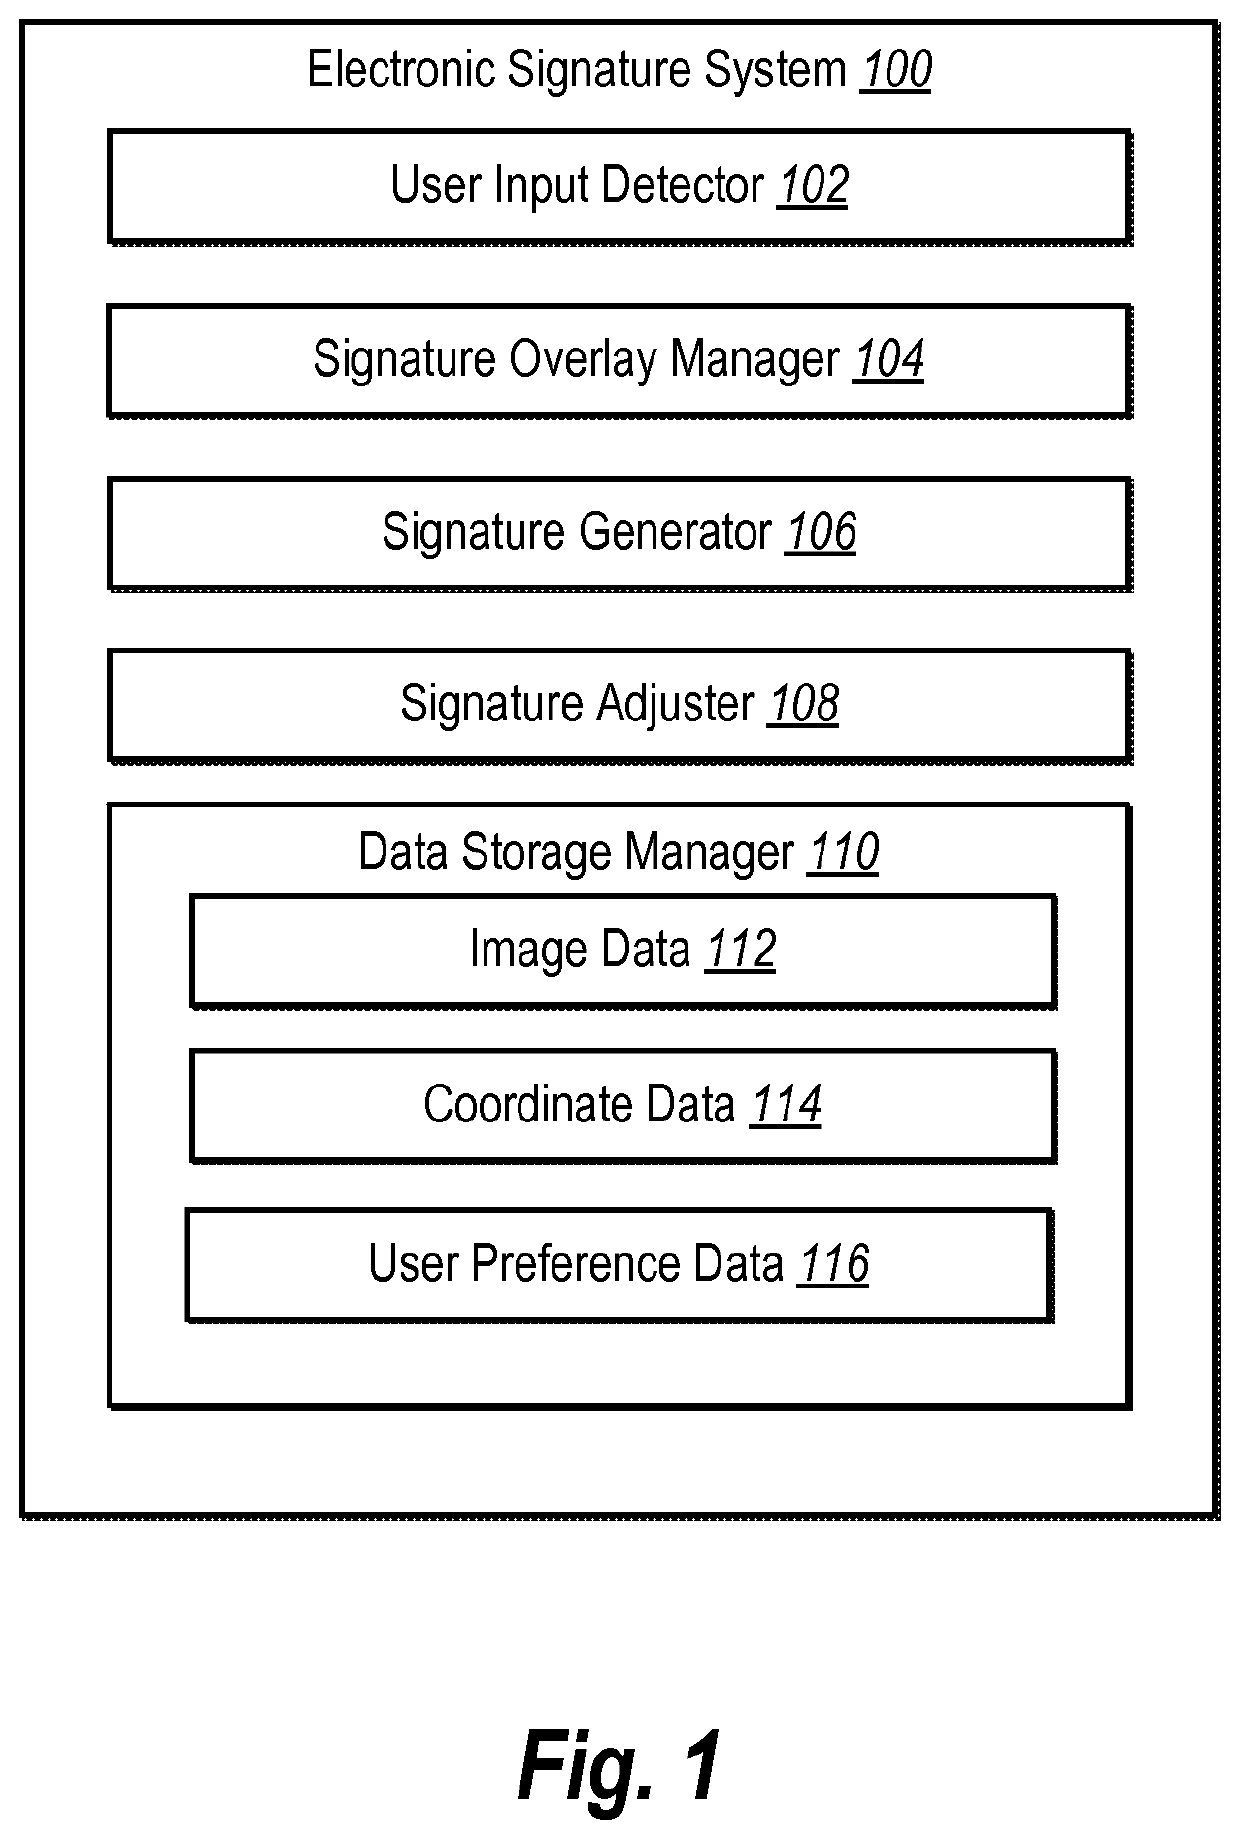 Capturing electronic signatures using an expanded interface area